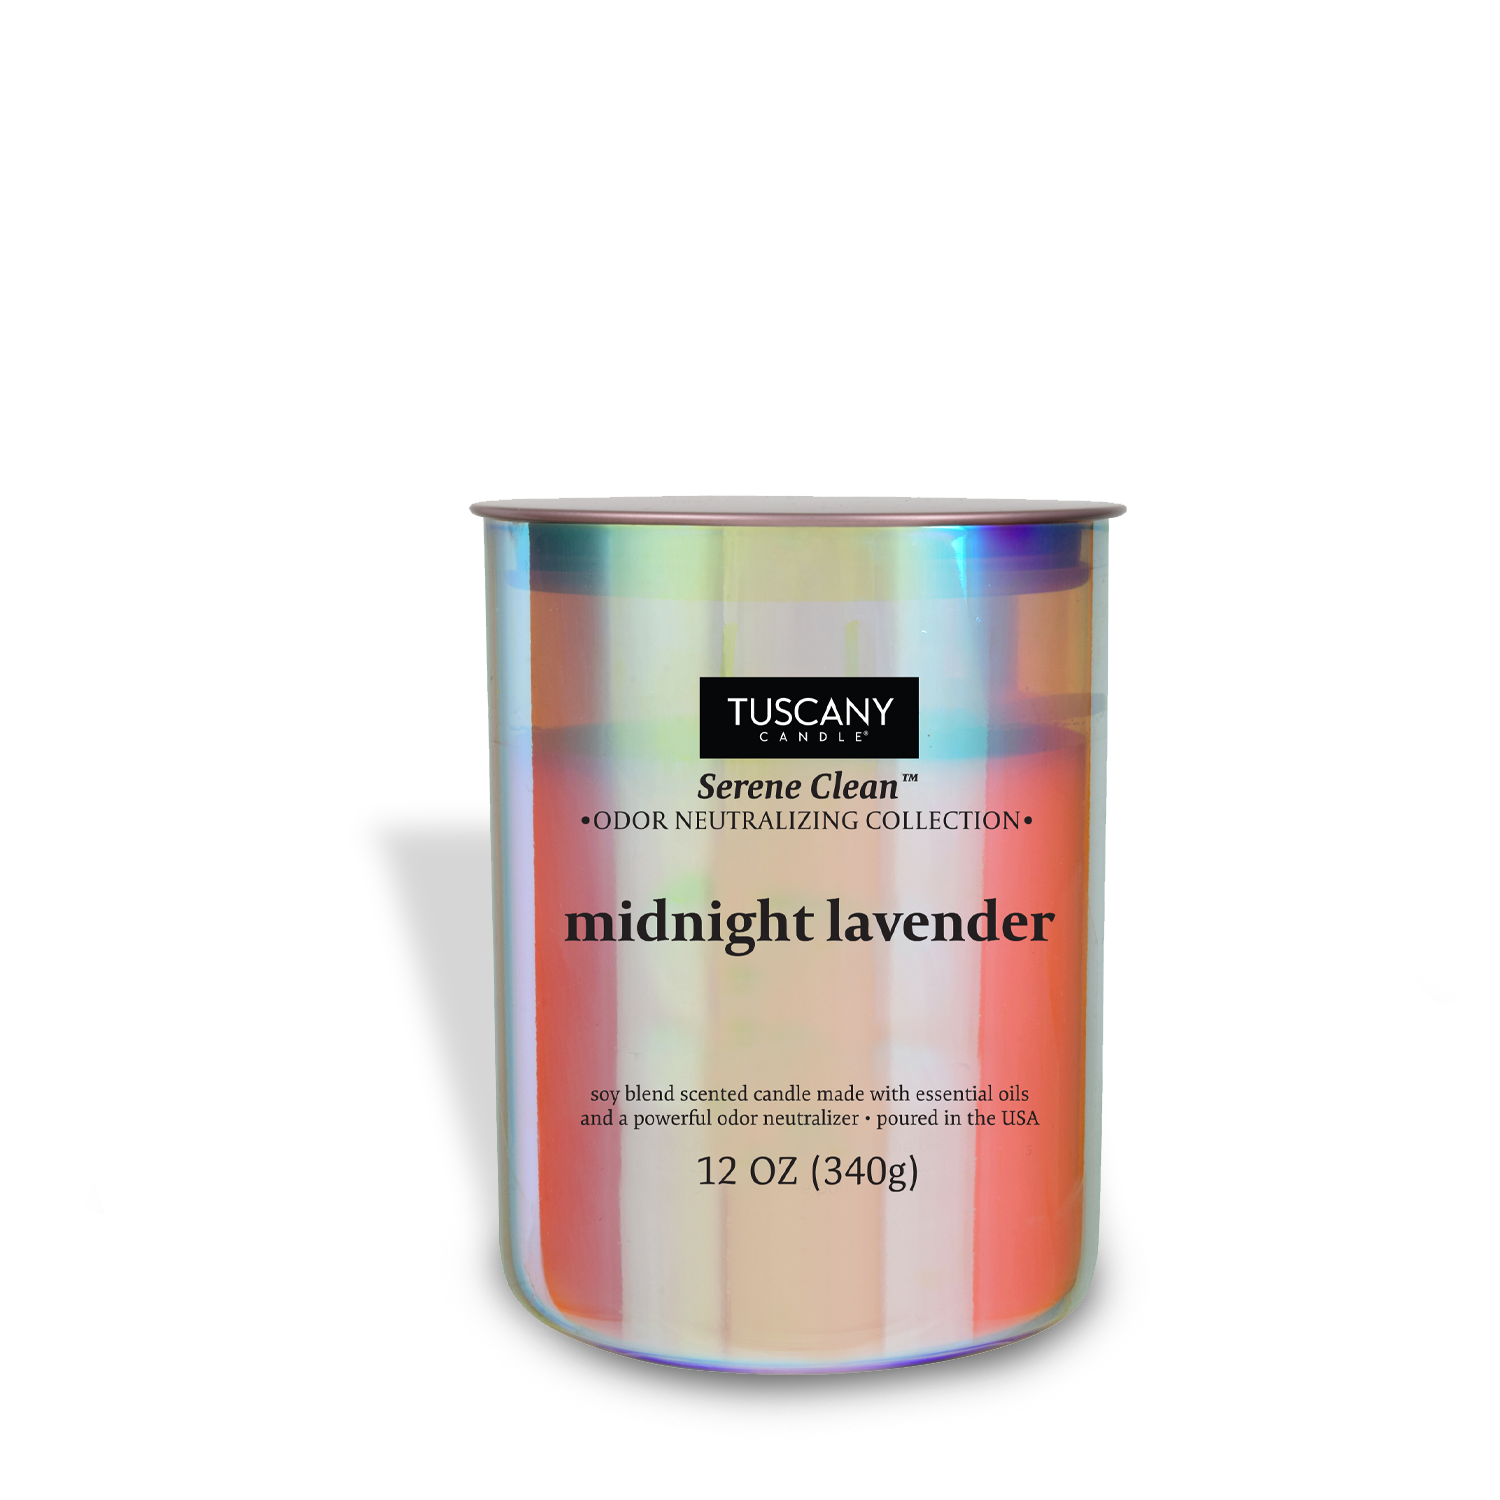 A can of Midnight Lavender Scented Jar Candle (12 oz) from the Serene Clean Collection on a white background by Tuscany Candle® EVD.